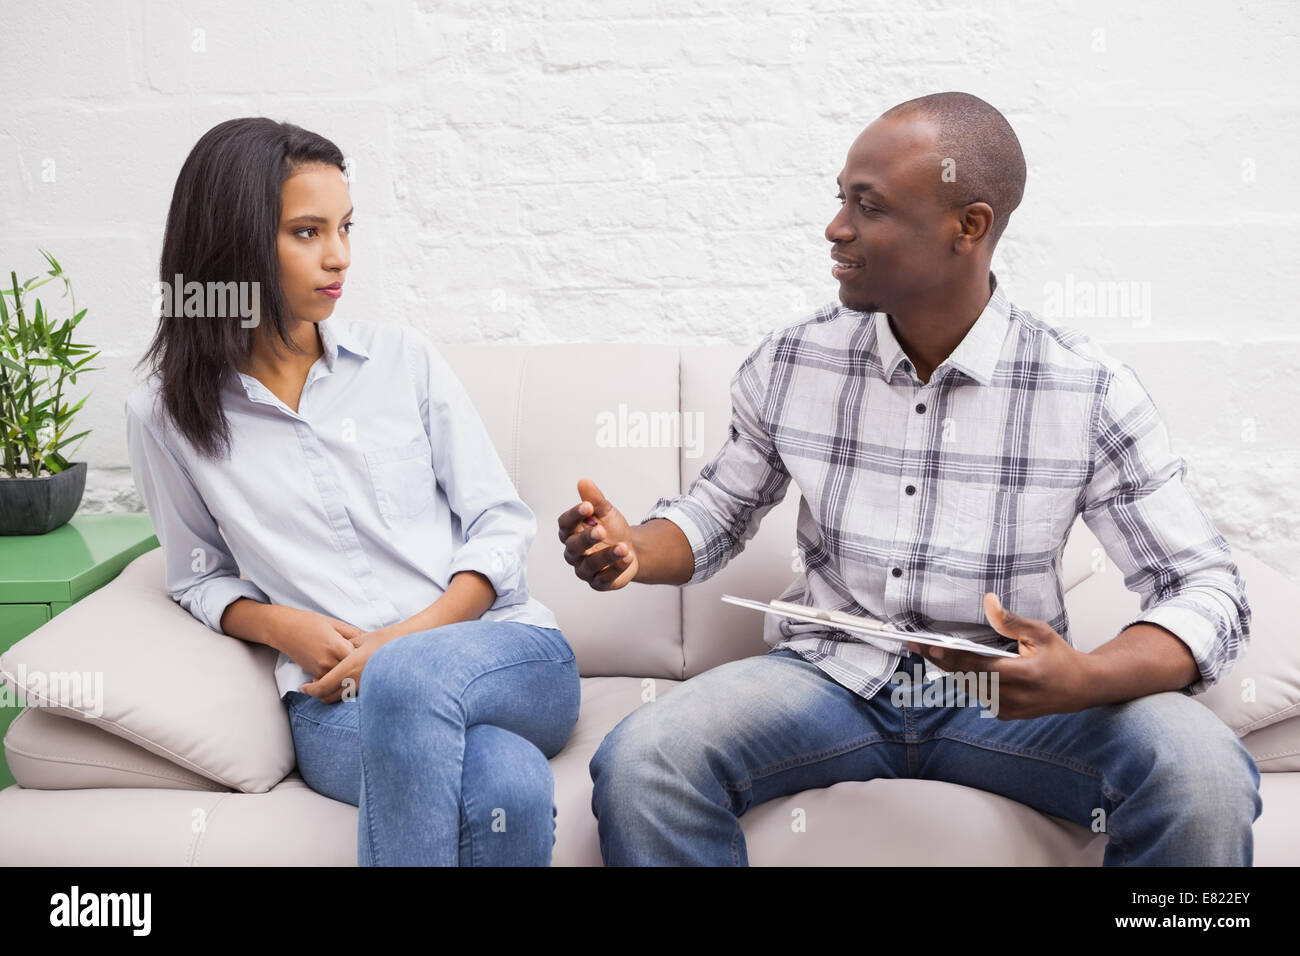 Therapist talking to his patient Stock Photo